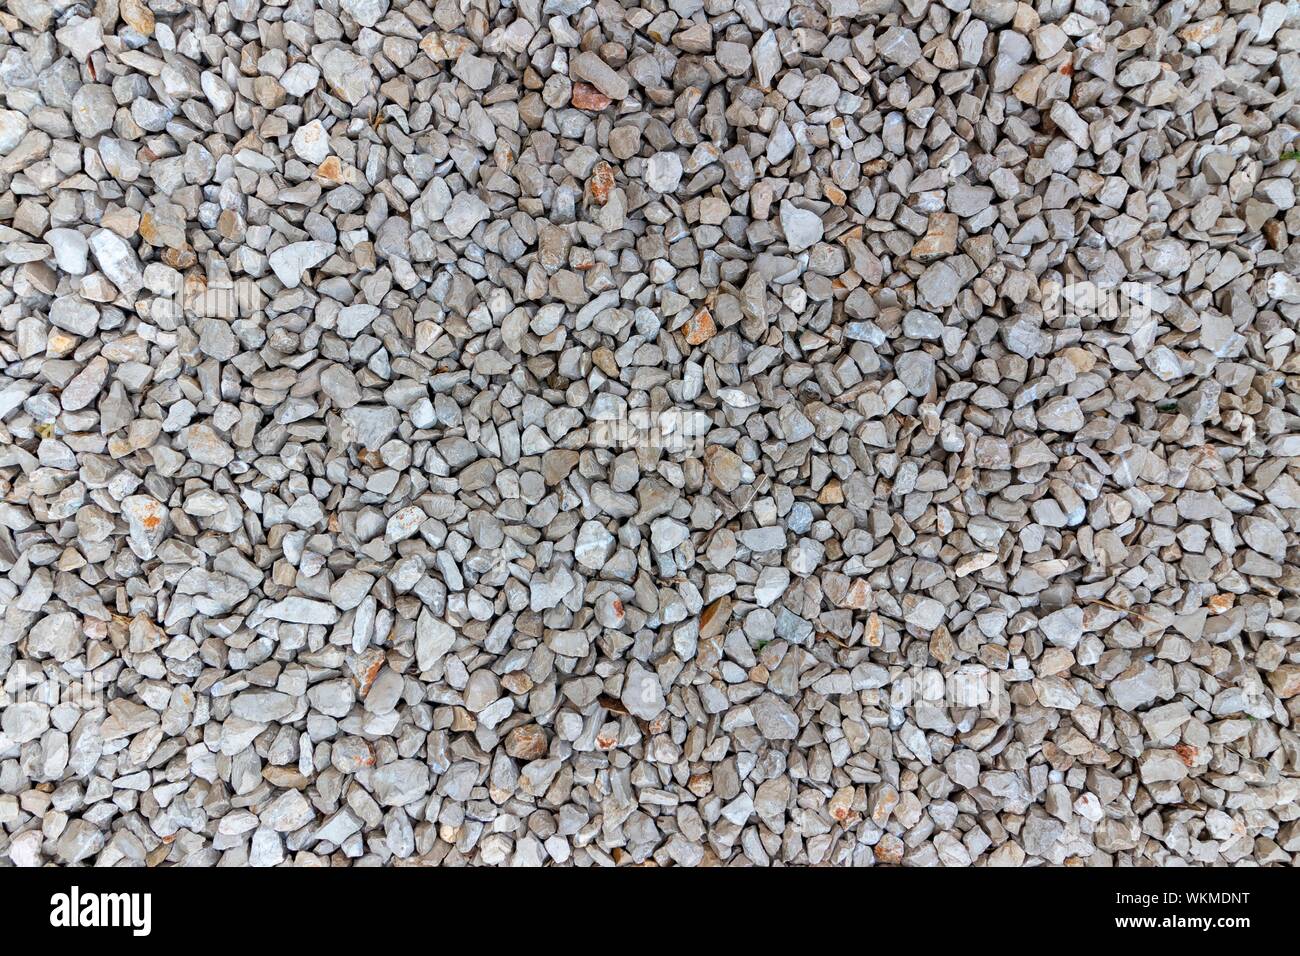 gravel pad for the yard Stock Photo